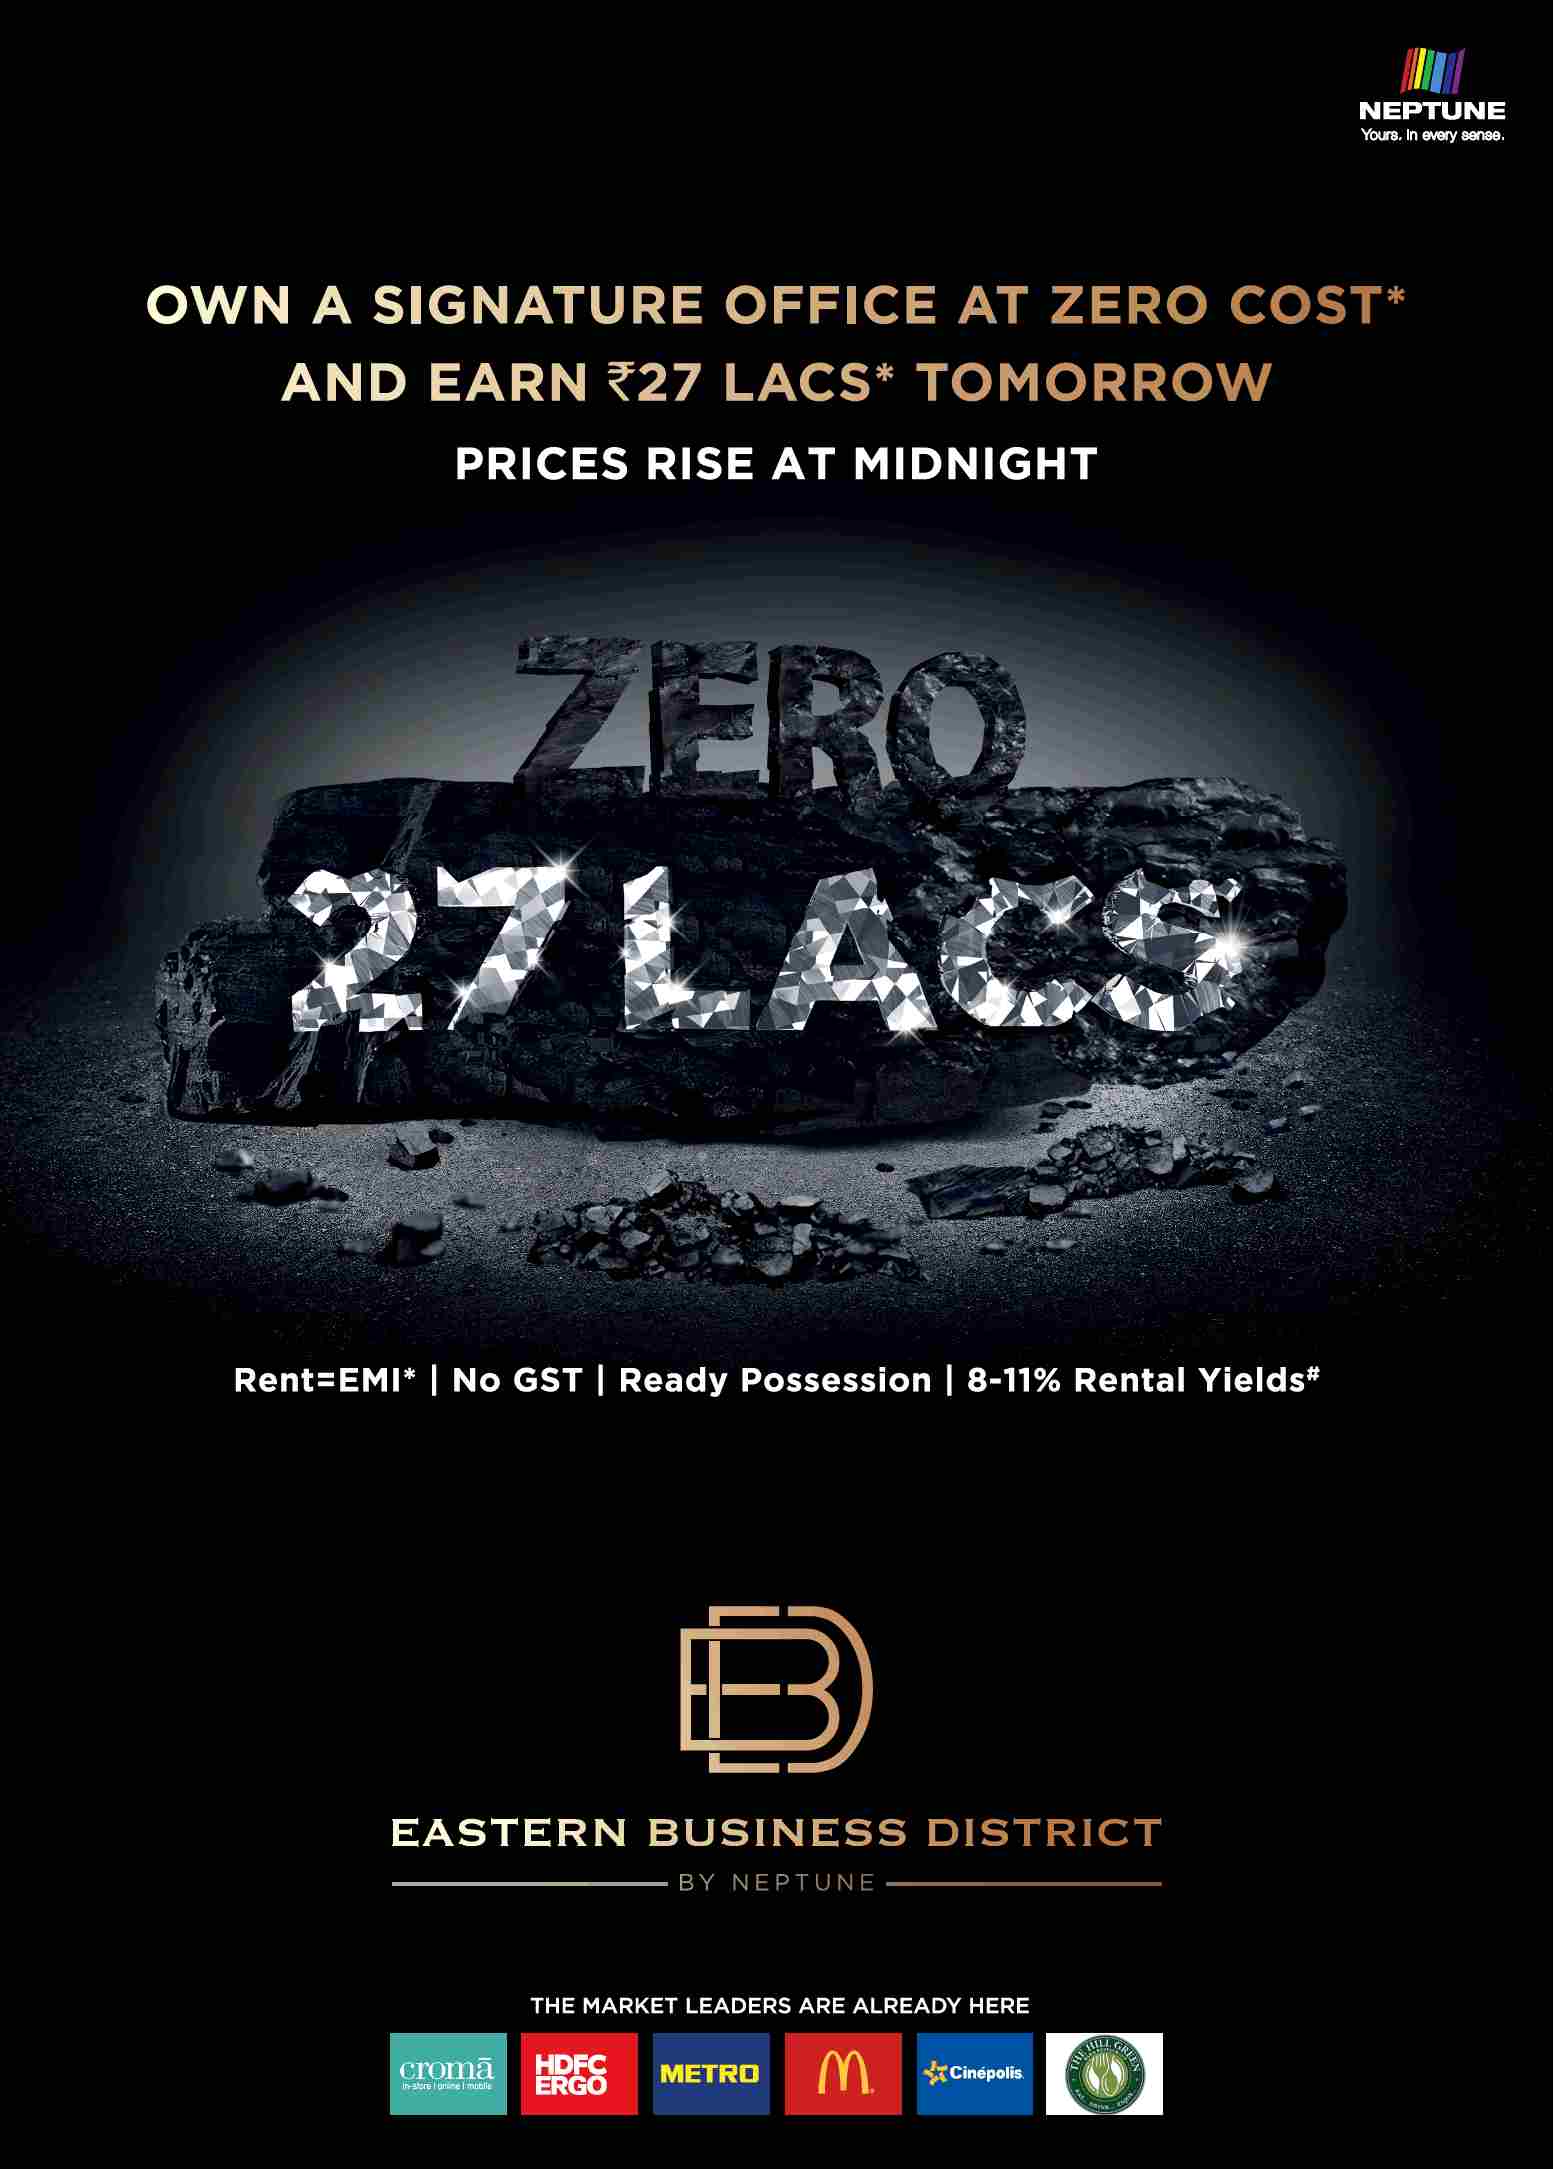 Own a signature office at zero cost and earn Rs. 27 Lacs at Neptune Eastern Business District in Mumbai Update